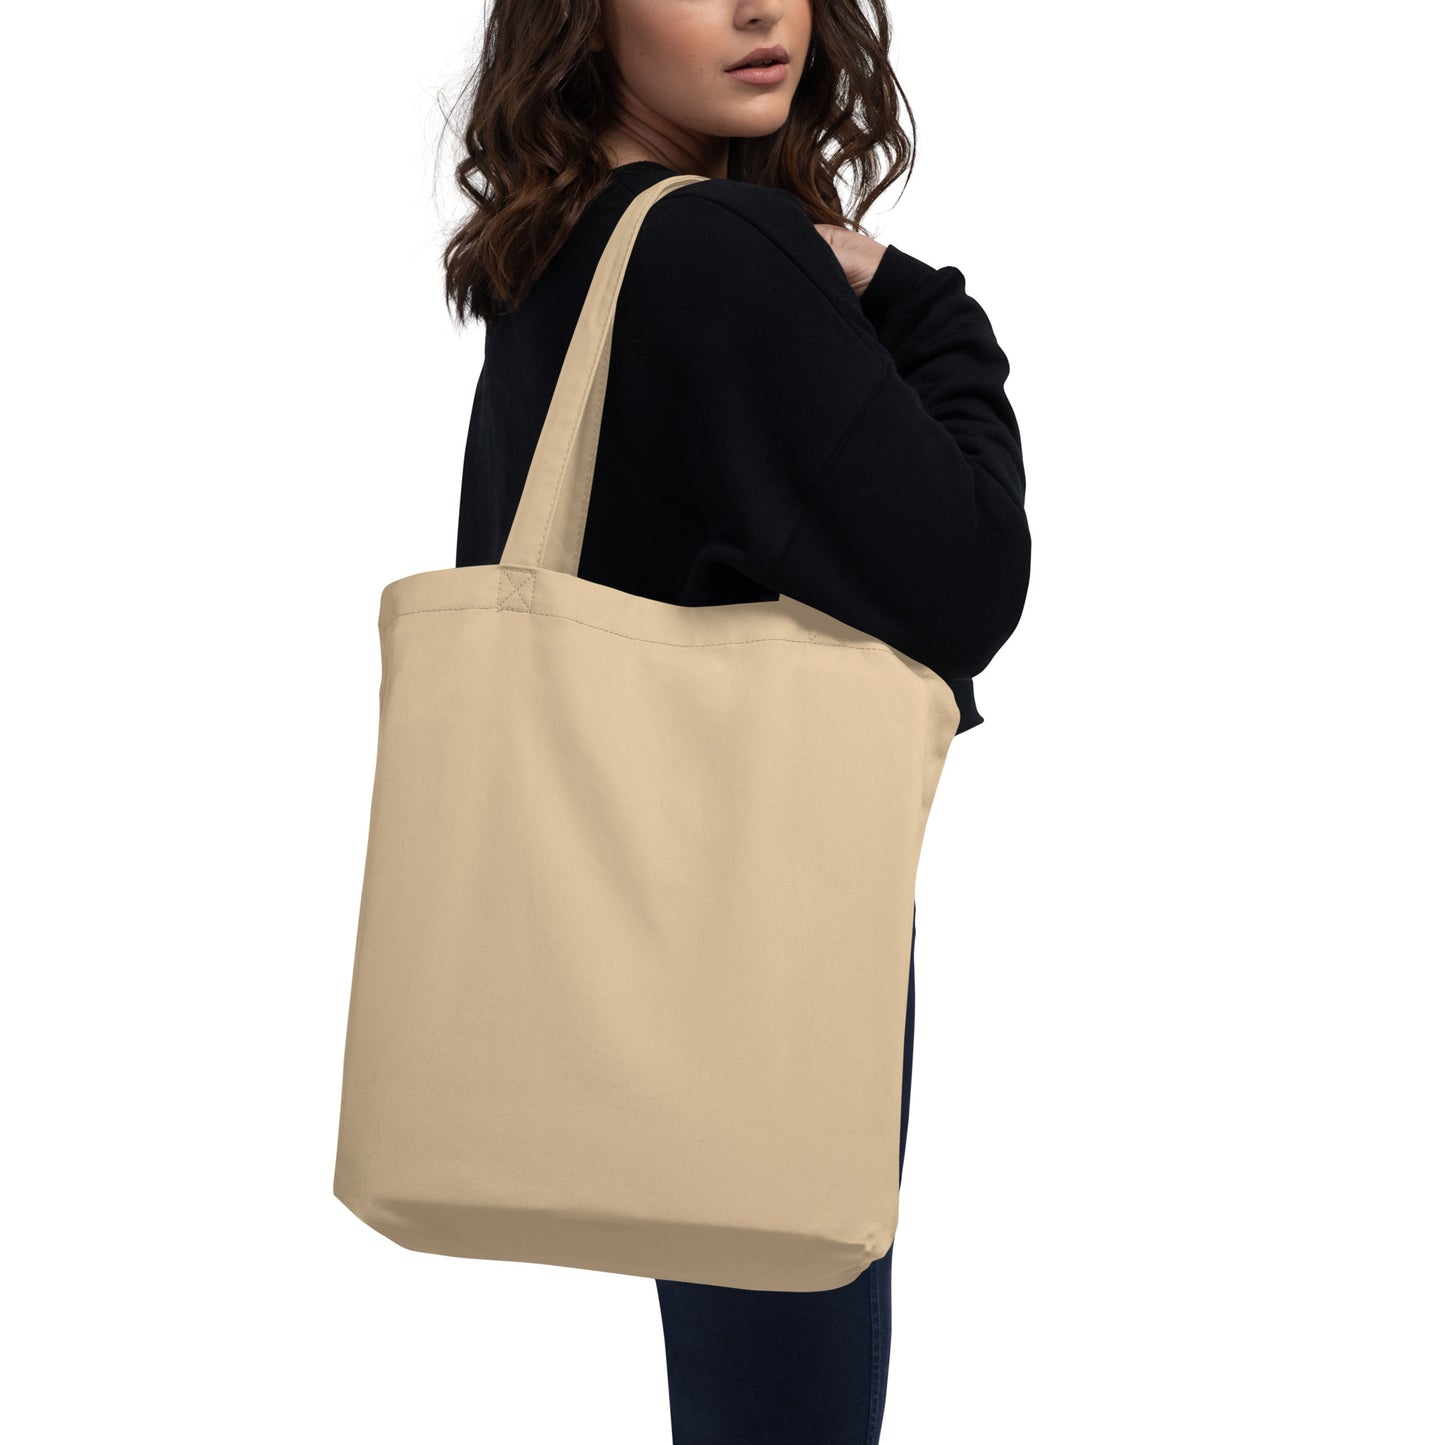 Aviation Gift Organic Tote - Black • CLE Cleveland • YHM Designs - Image 06